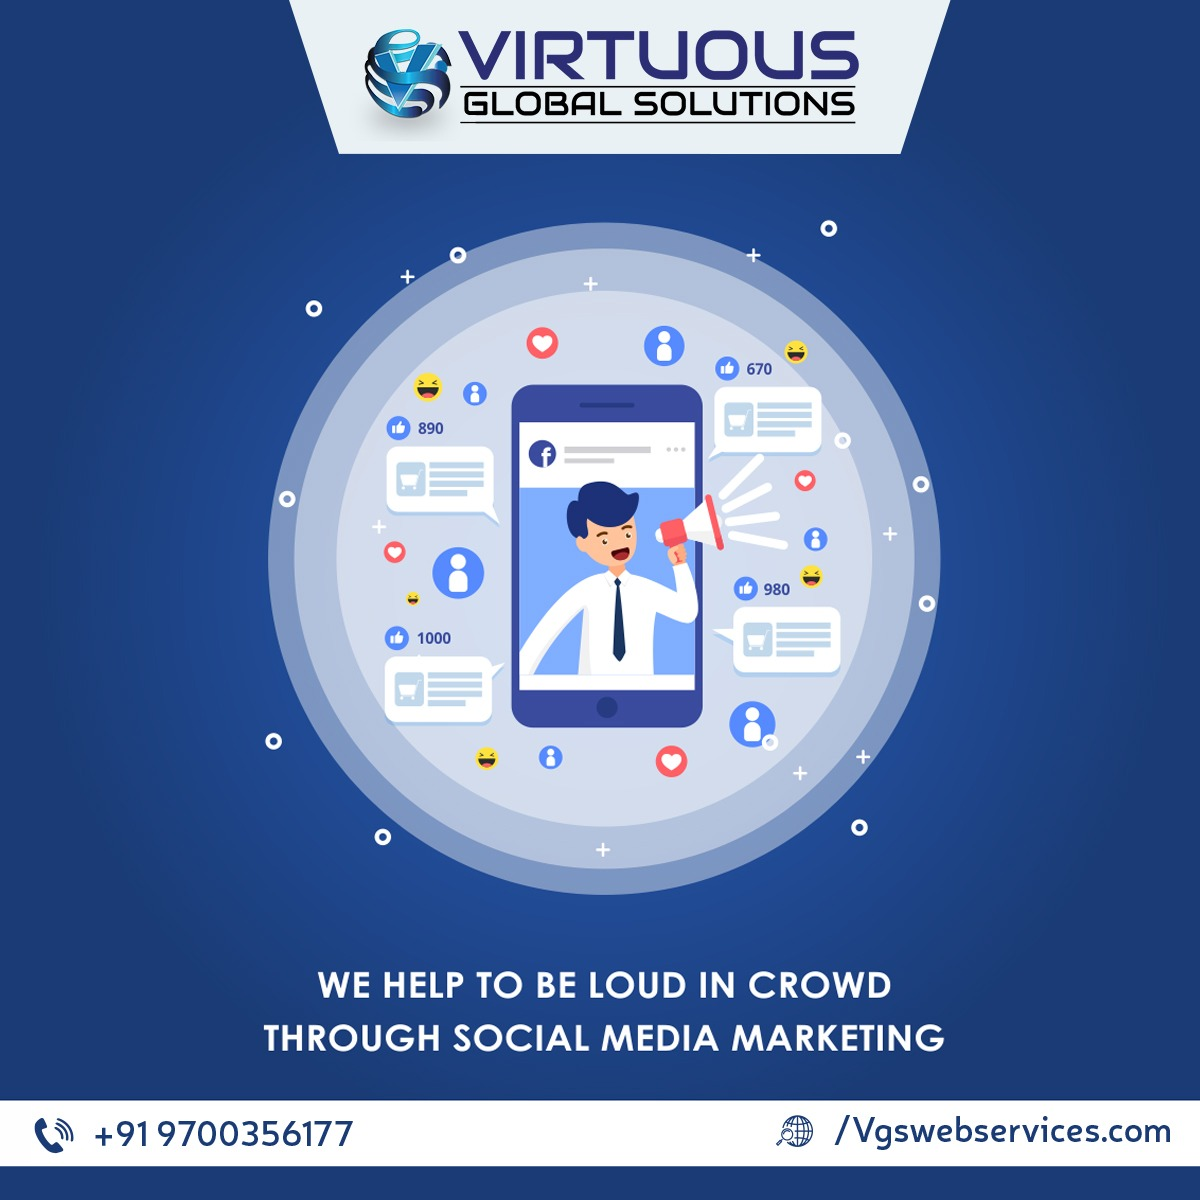 Virtuous Global Solutions